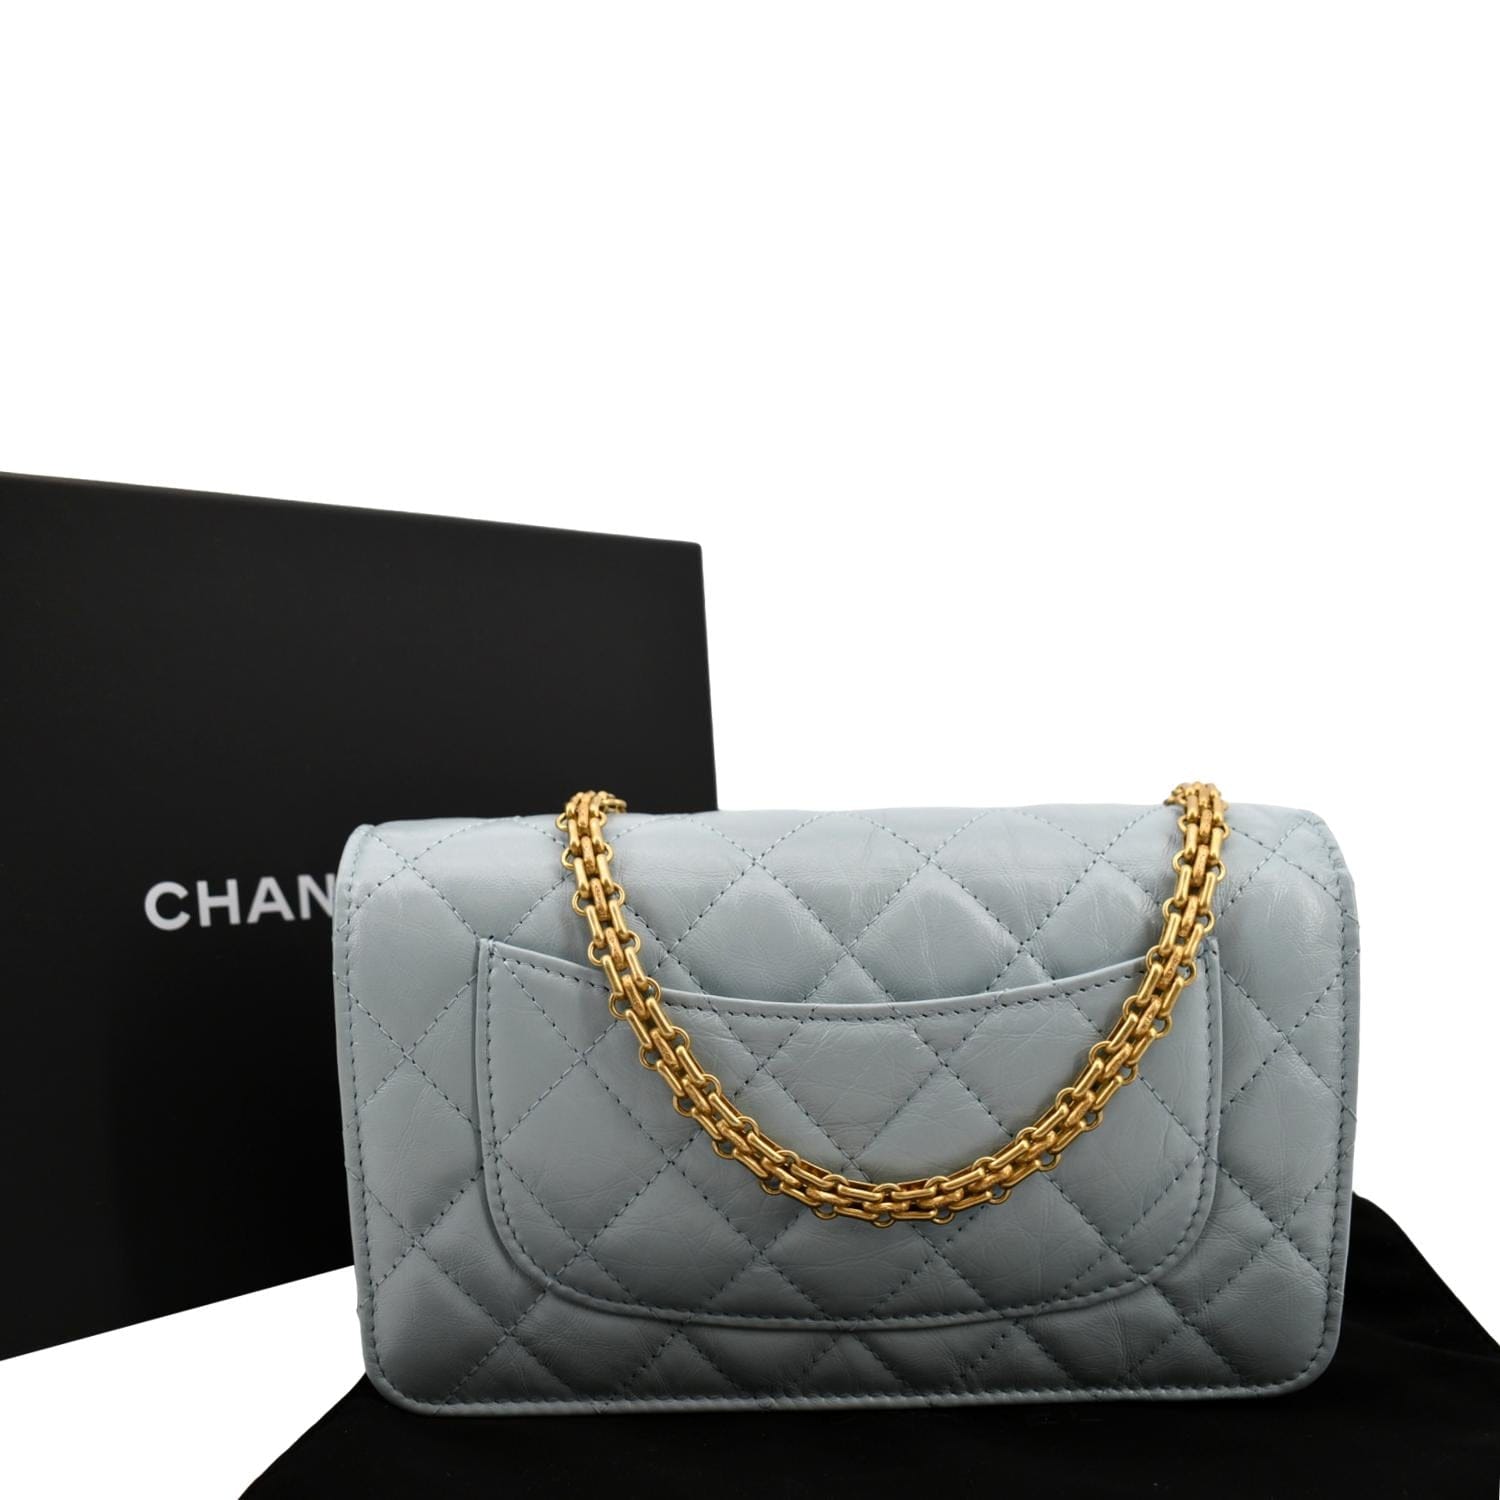 Chanel Pre Owned 2001 Two-Tone Chain Shoulder Bag - ShopStyle